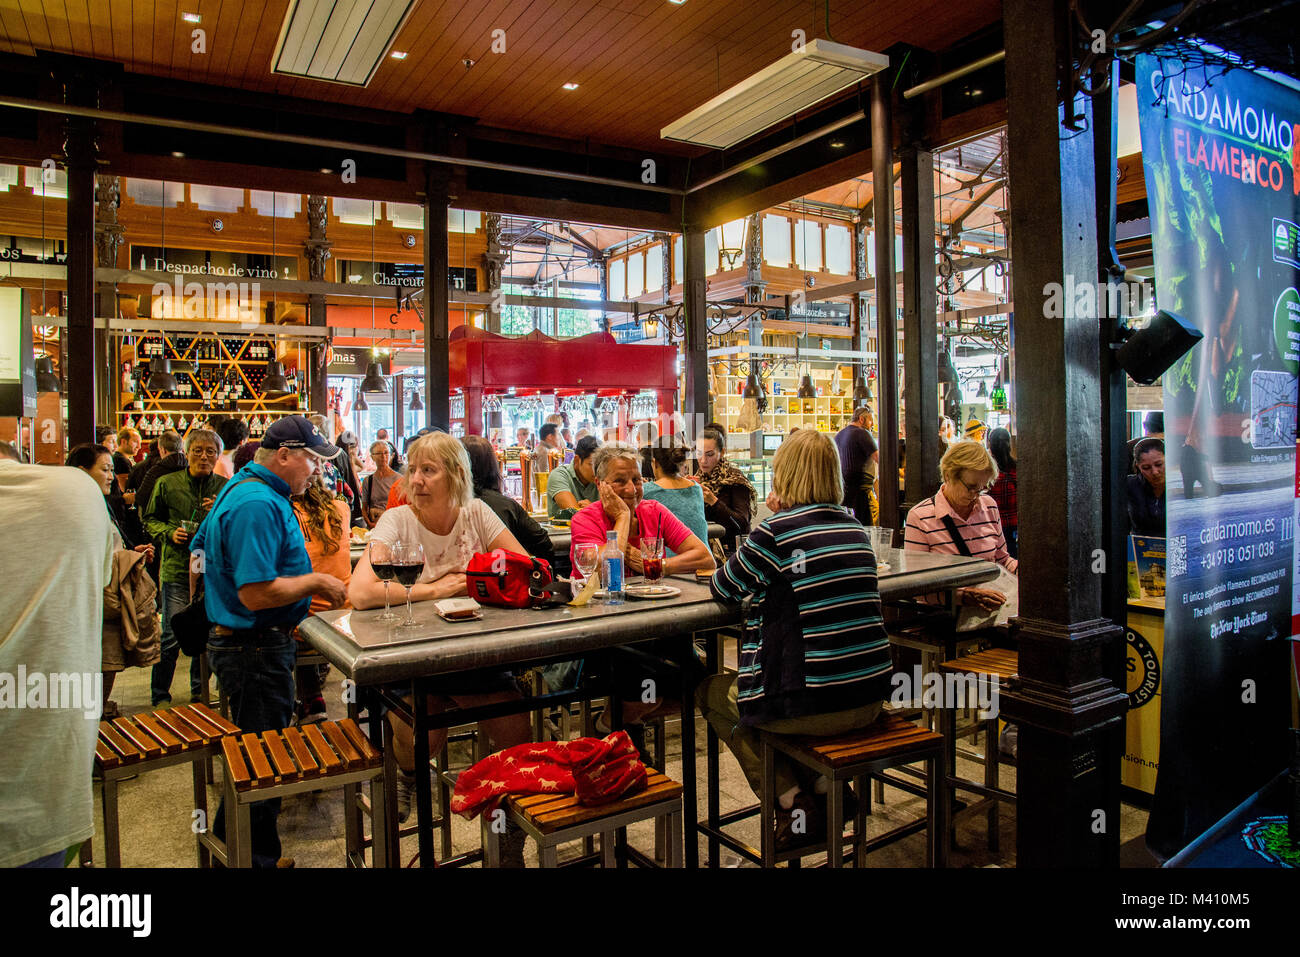 popular luncheon with many restaurants in the market Mercado de San Miguel in central Madrid Stock Photo